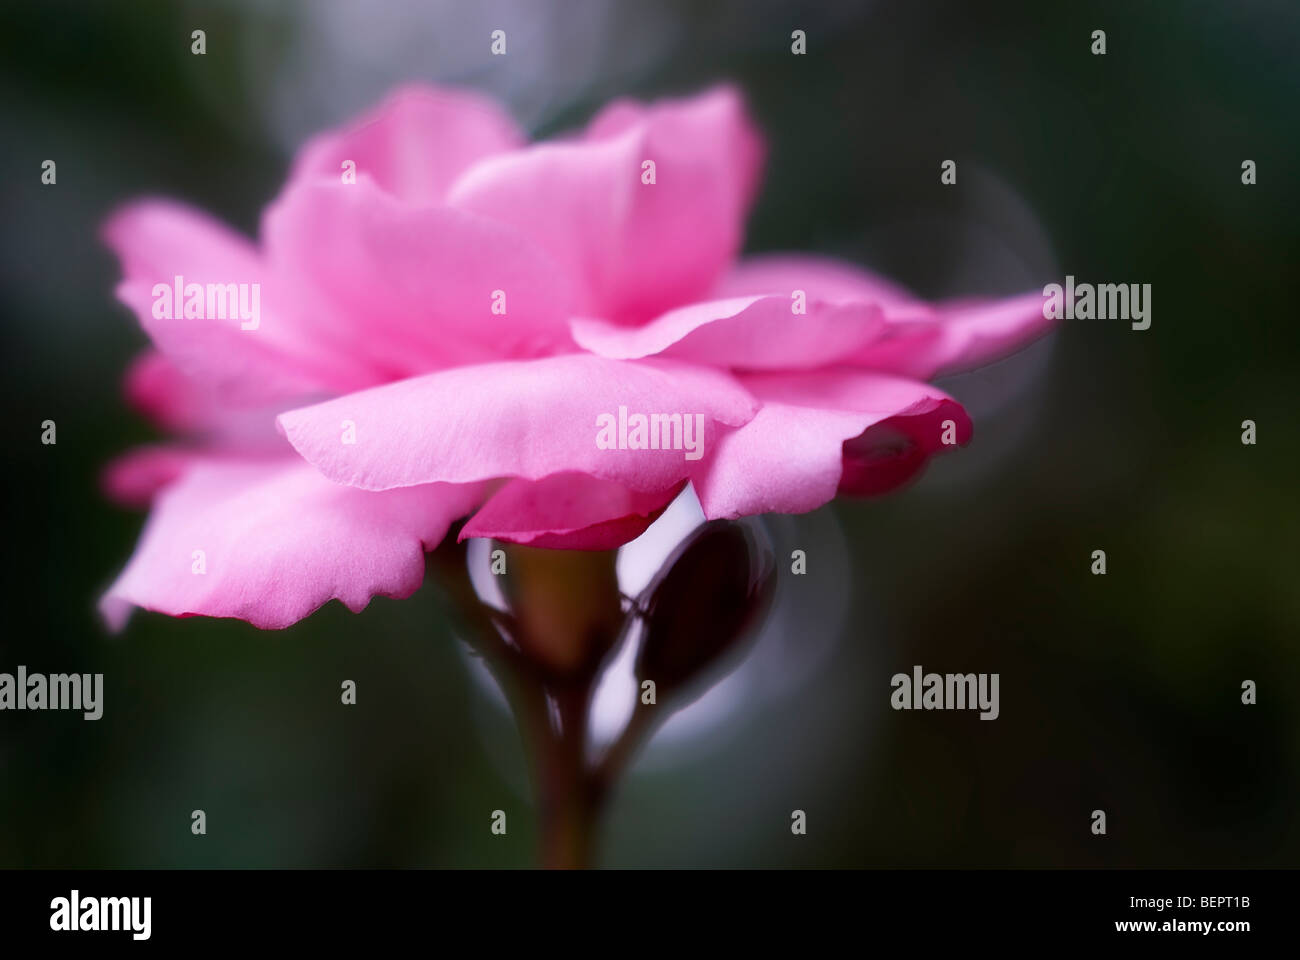 Oleander, pink flower, flowers, close-up, close up, pink, macro, focus Stock Photo